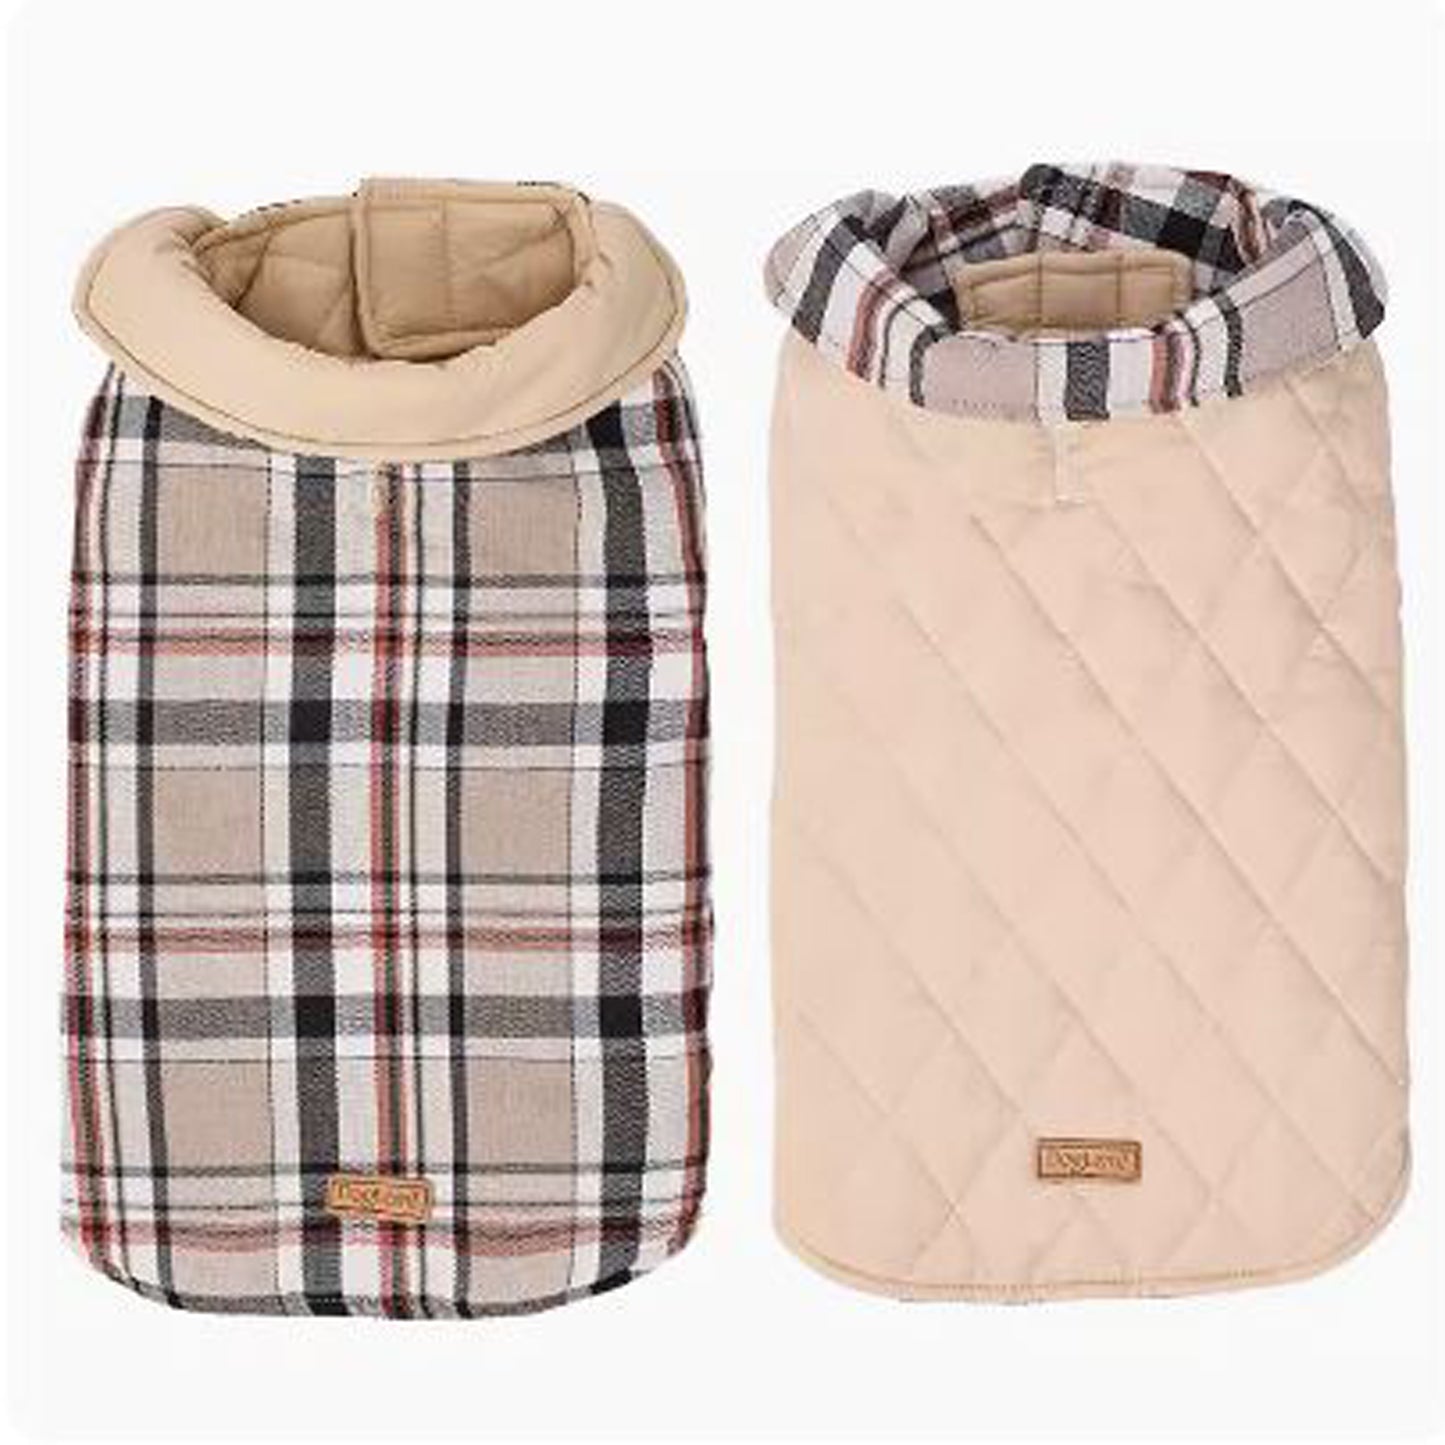 PlaidPup-Warm-and-Stylish-Frenchie-Plaid-Vest-Double-Sided-Winter-Apparel-www.frenchie.shop